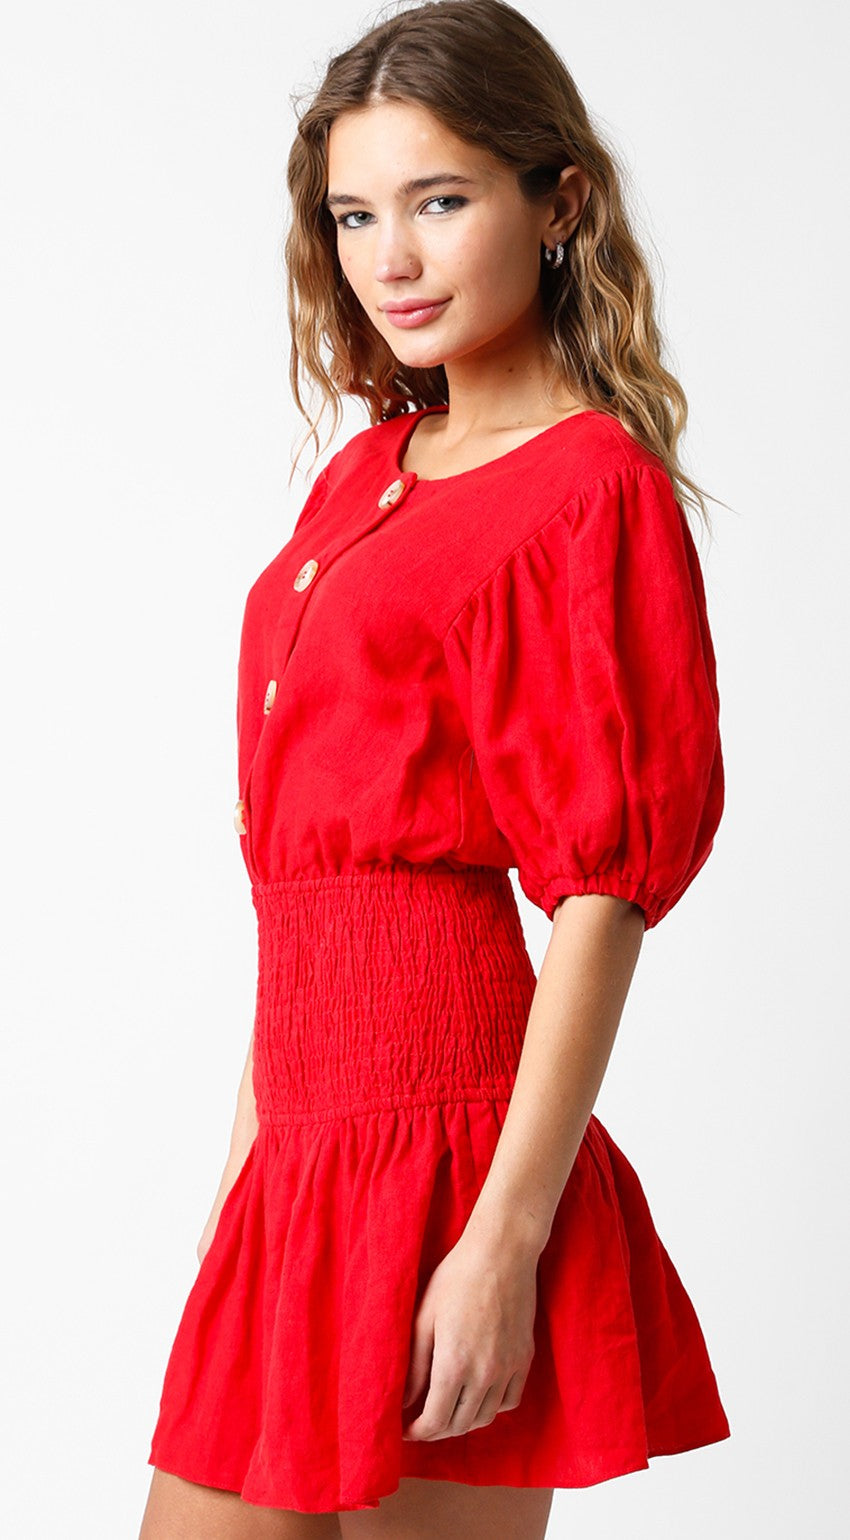 SILVIA DRESS IN RED